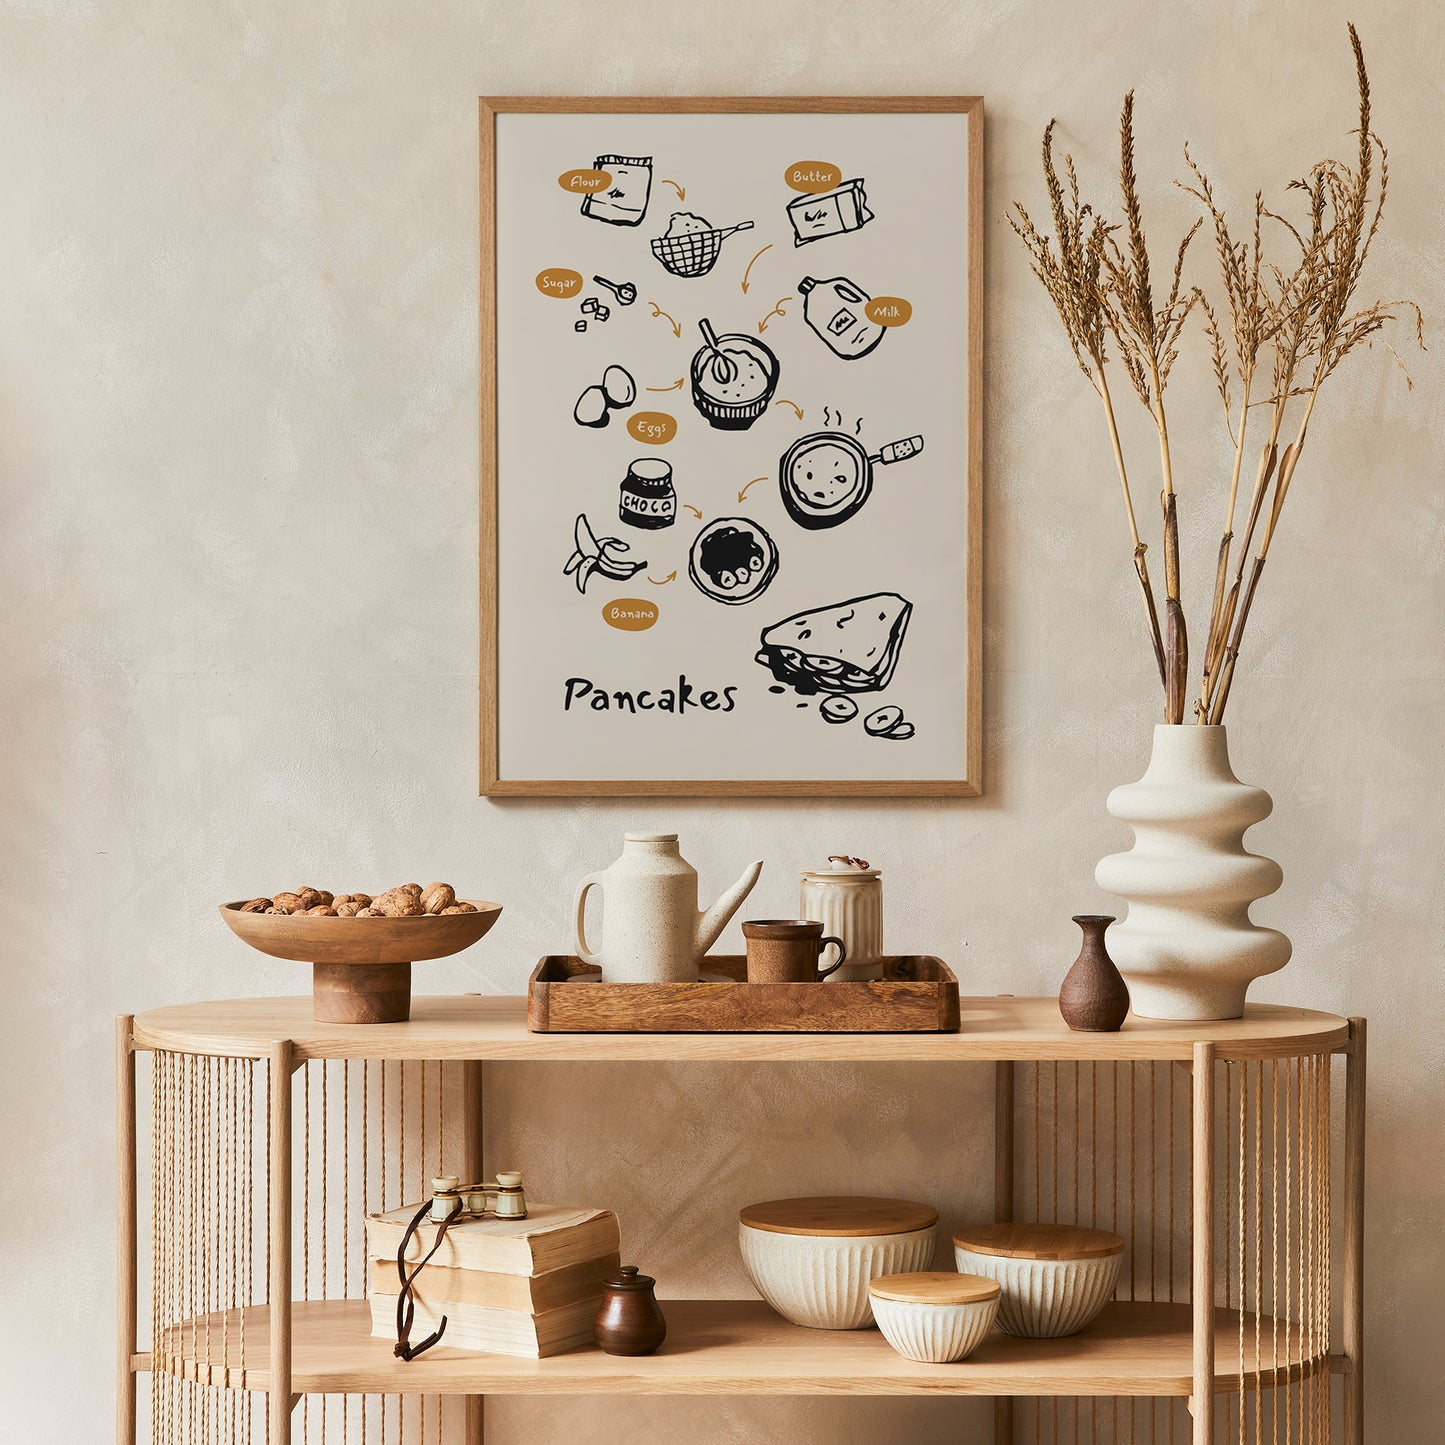 Good Old Fashioned Pancakes Recipe Poster